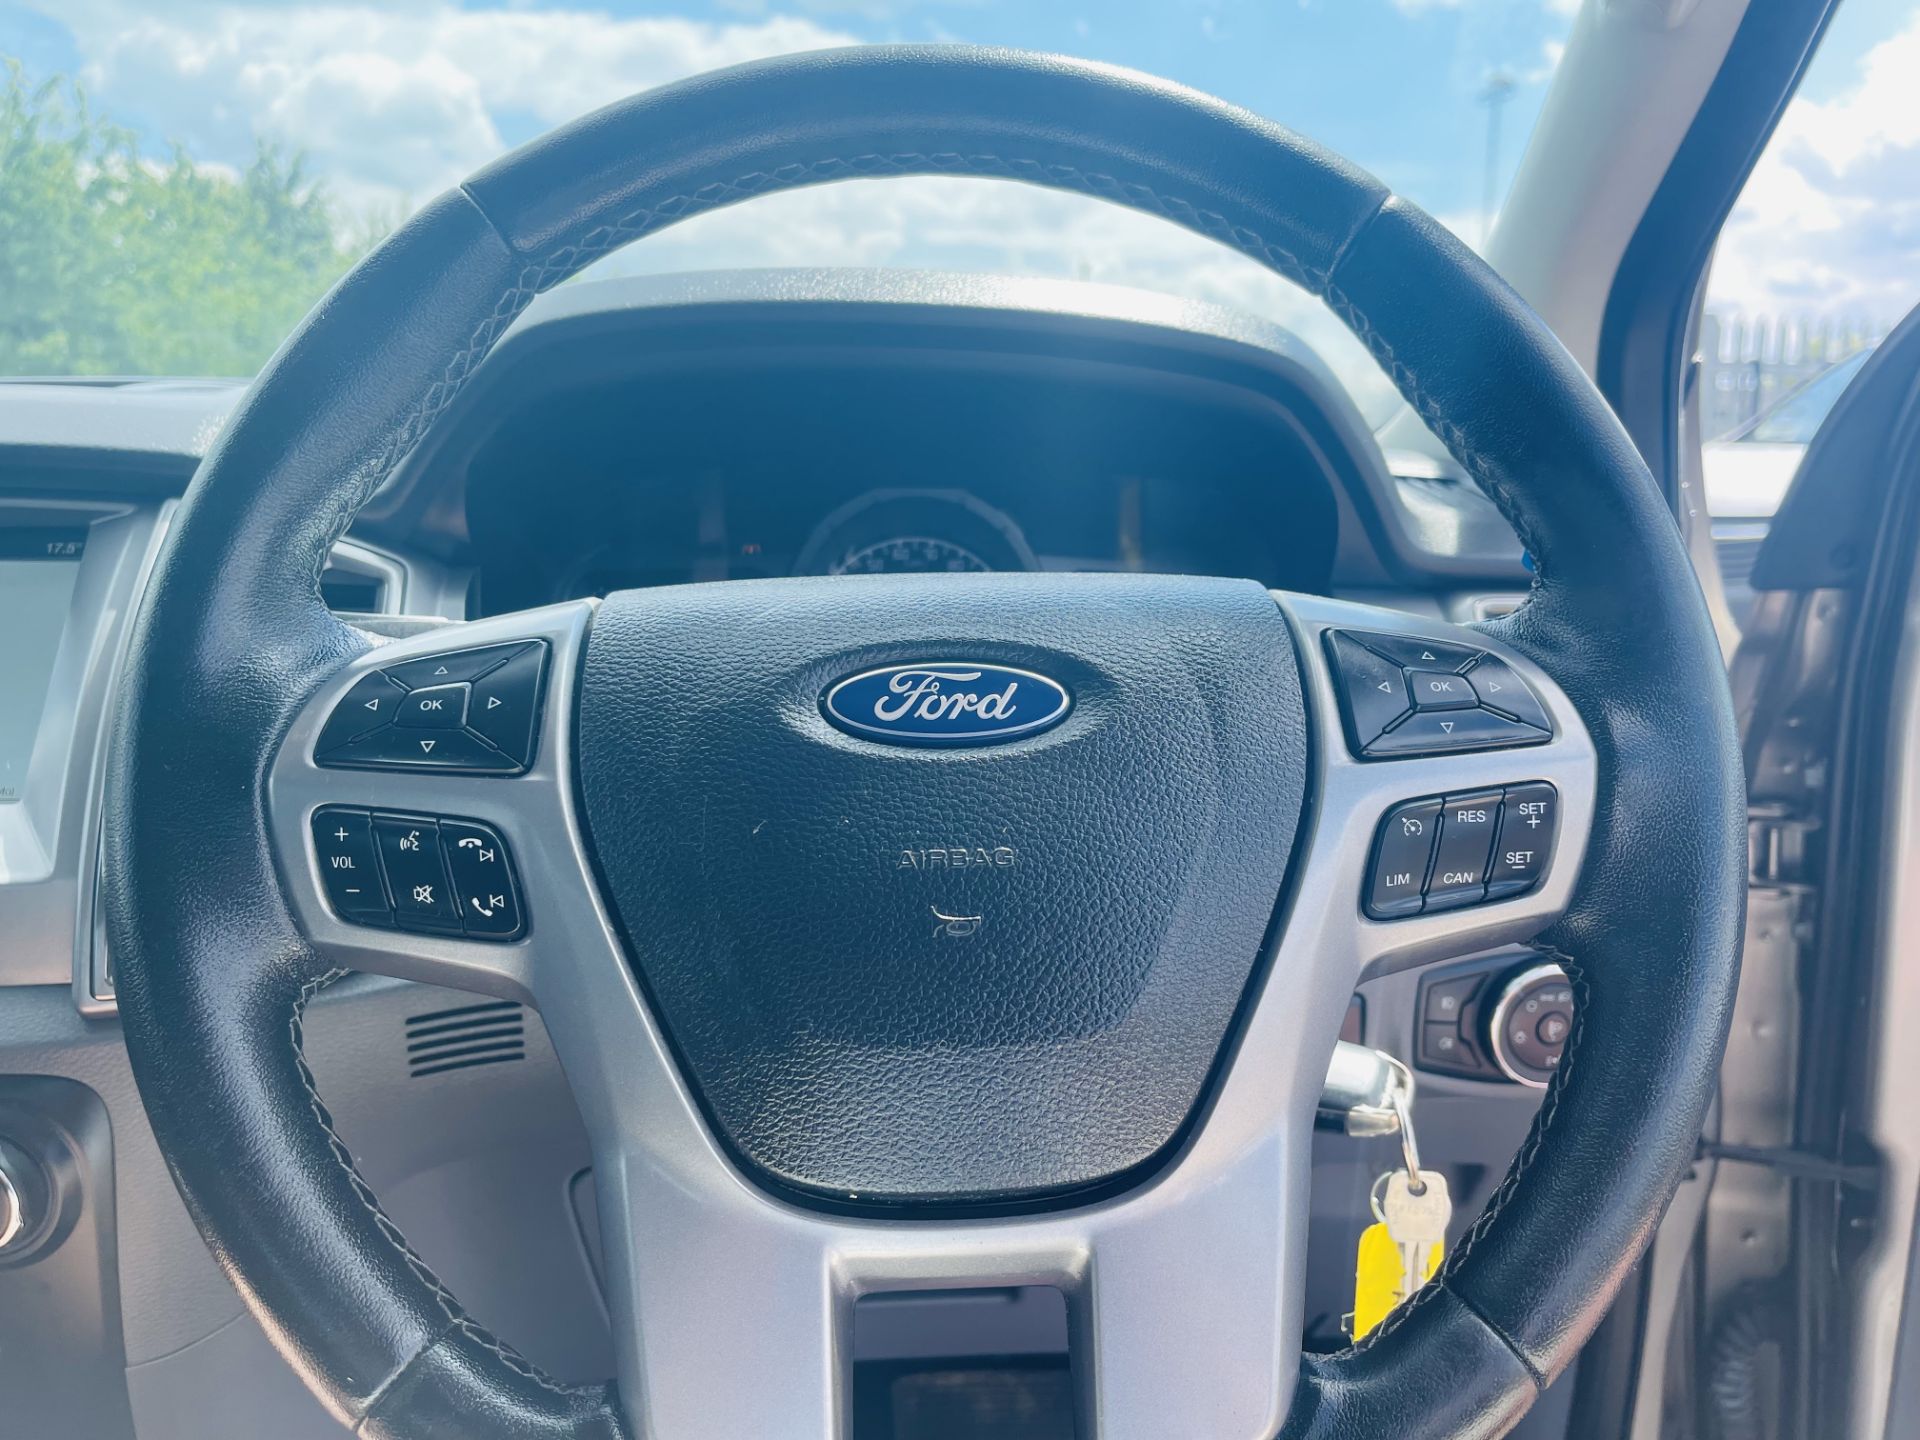 ** ON SALE ** Ford Ranger 3.2 TDCI Limited 2018 '68 Reg' Auto 4WD - Sat Nav - A/C - Euro 6 - Image 32 of 35